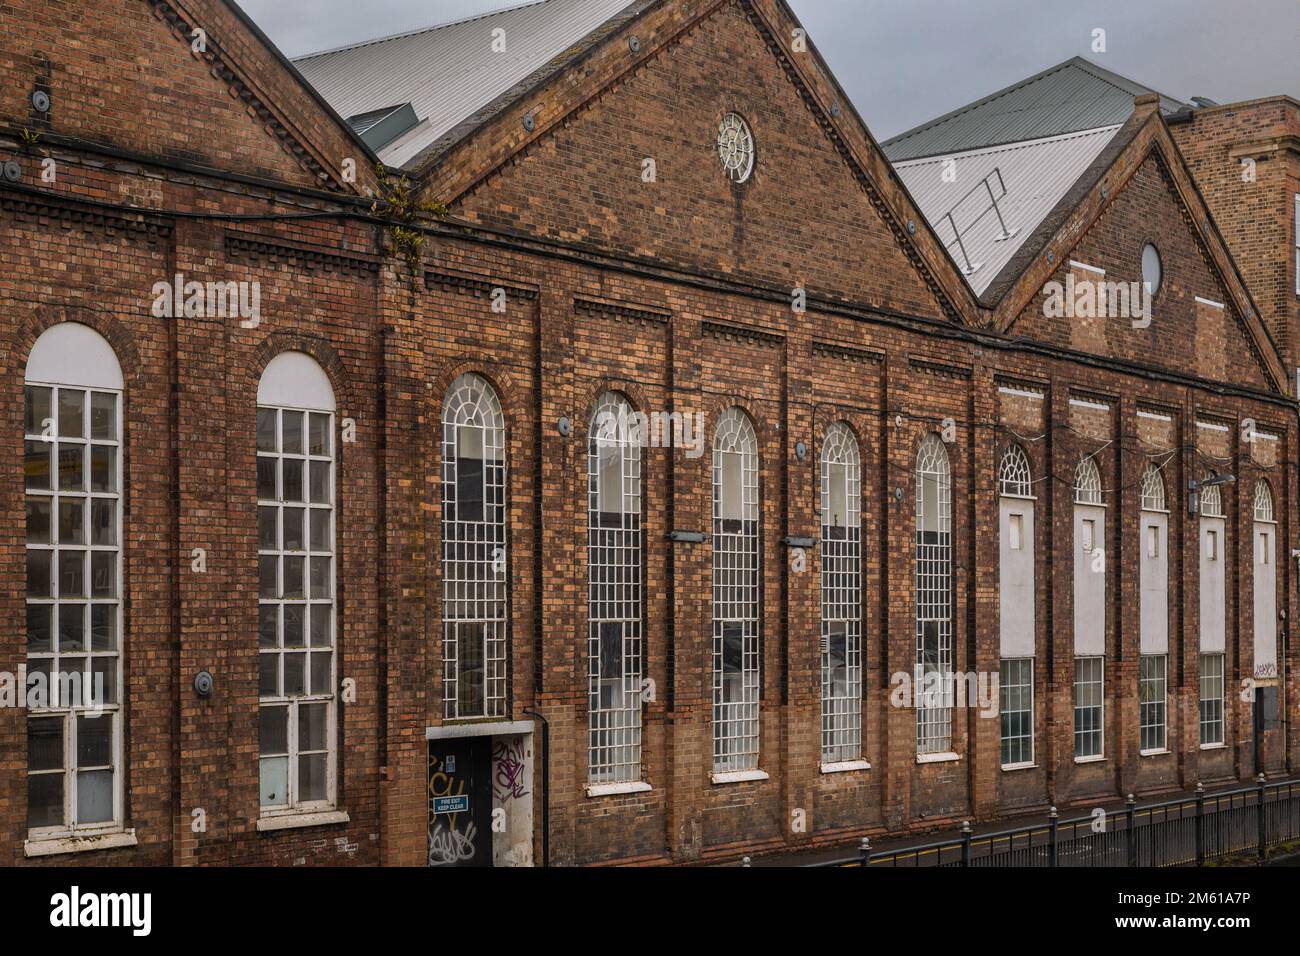 Detail of some old industrial buildings with tall arched windows. Engineering, business premises, workshop, industry concept. Stock Photo